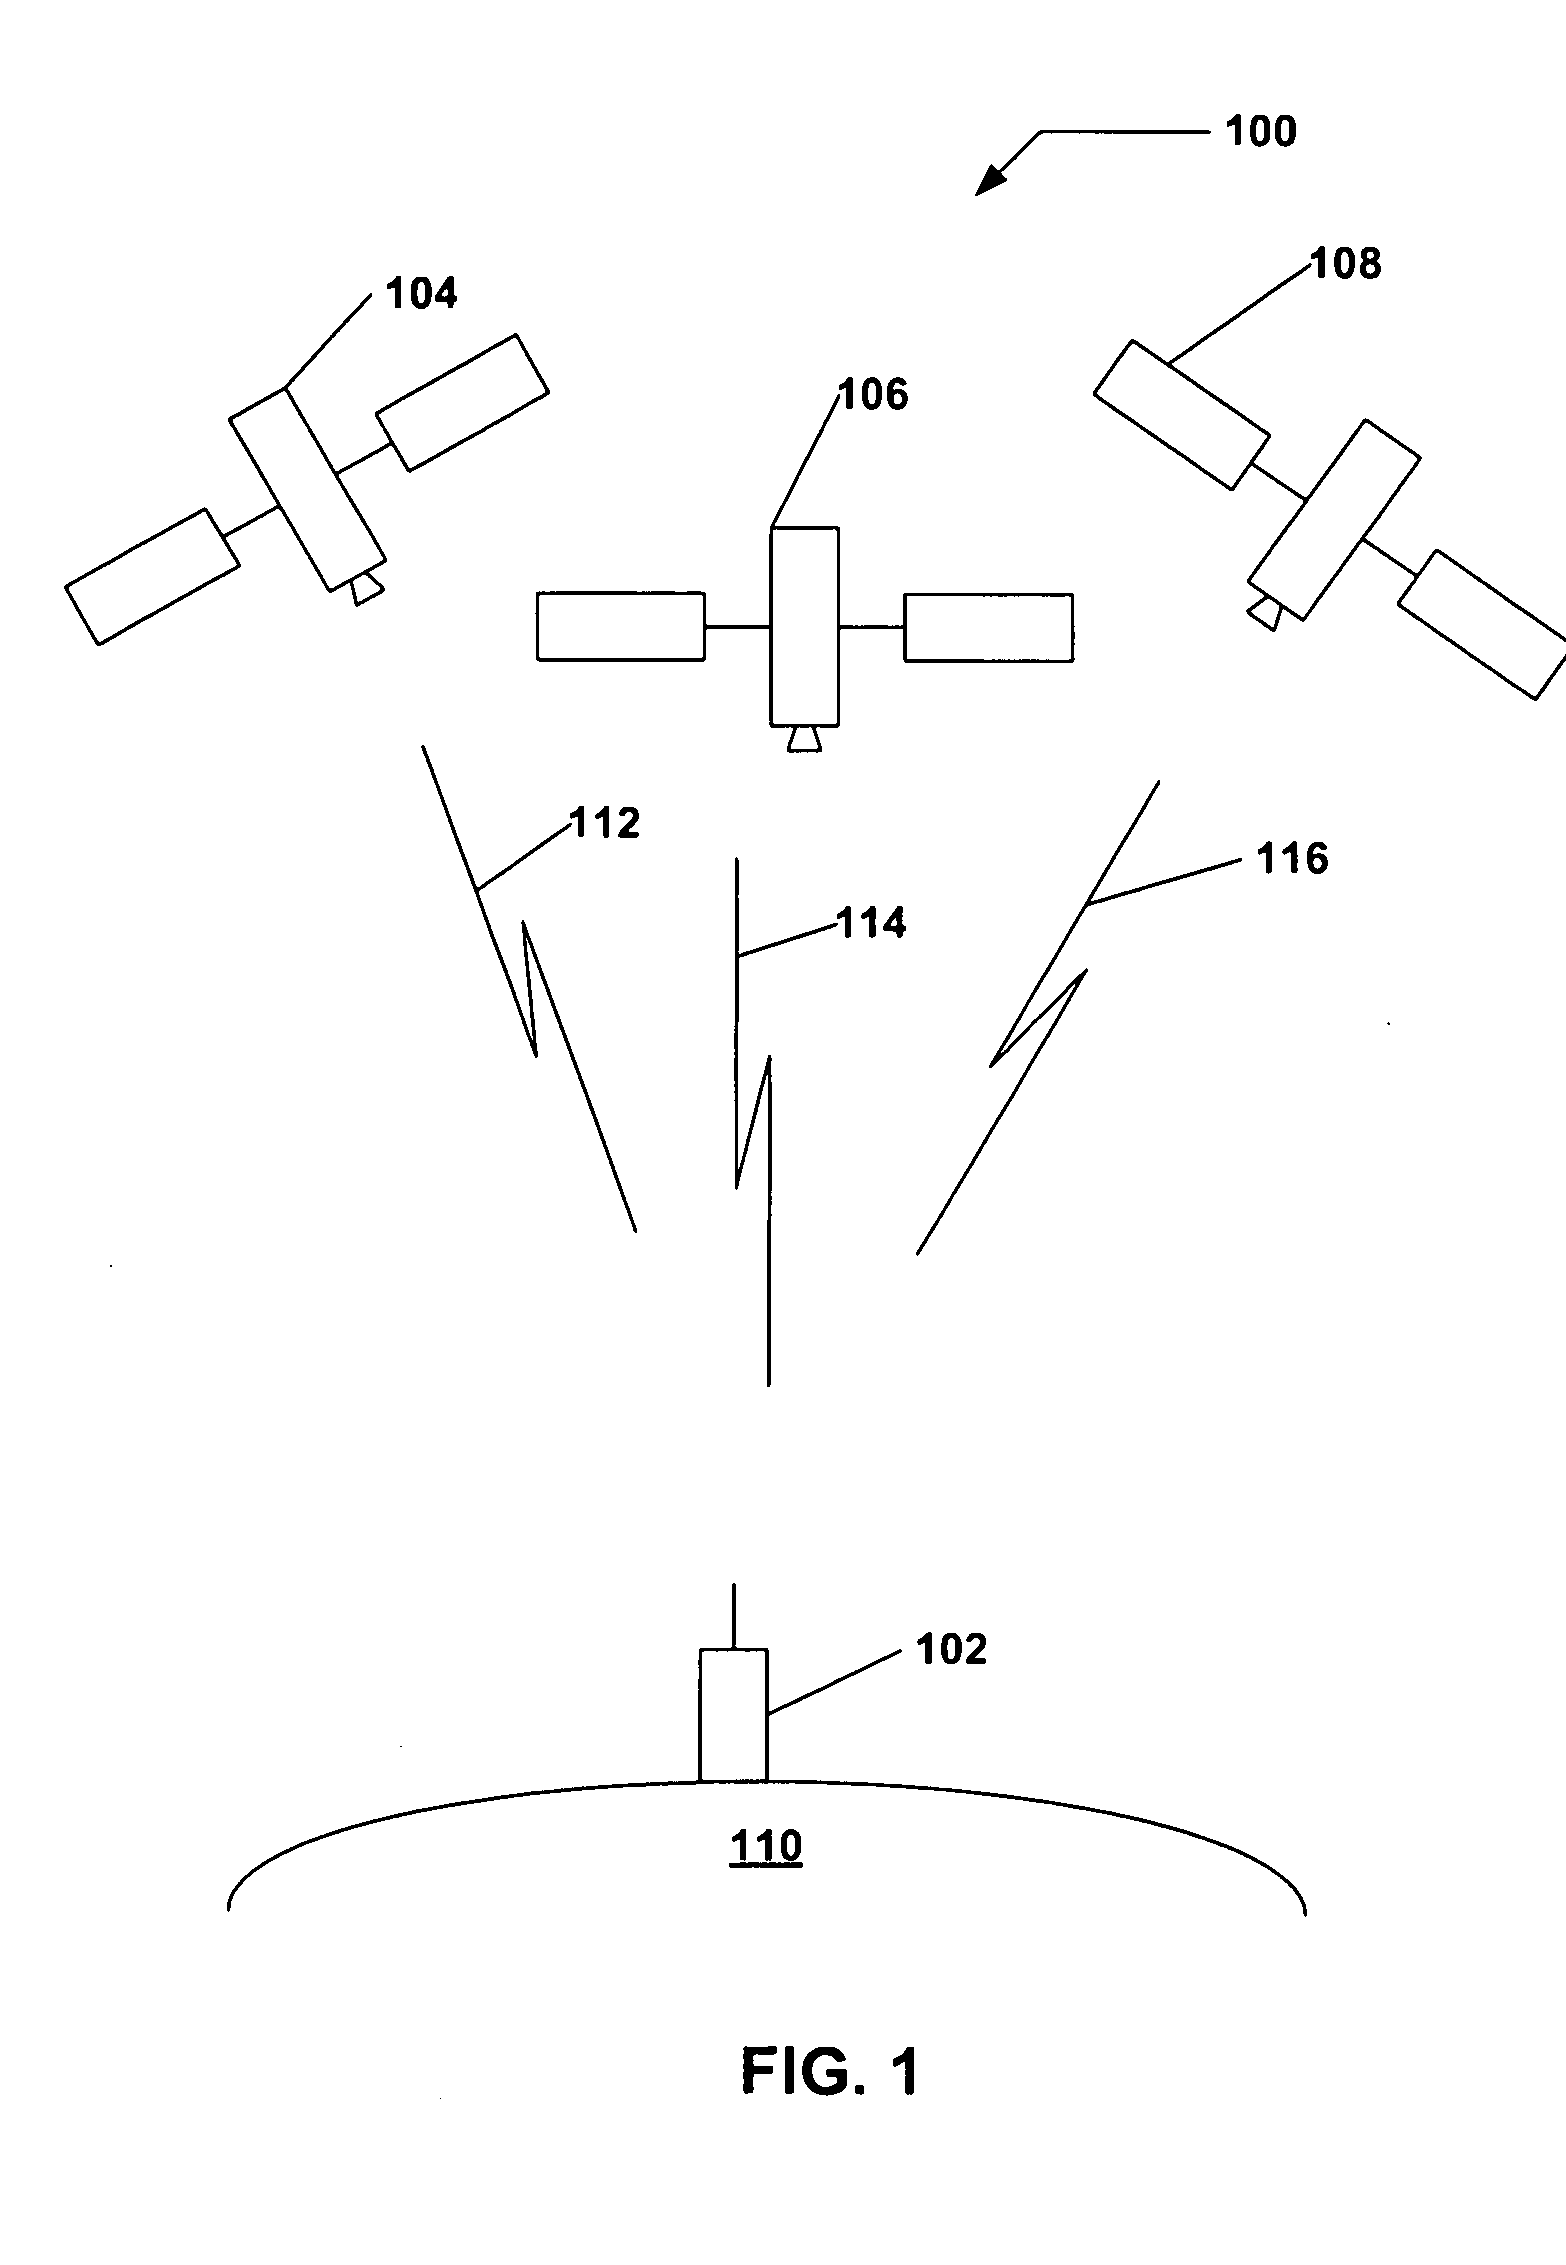 Method and Apparatus for Mitigating the Effects of Narrowband Interfering Signals in a GPS Receiver